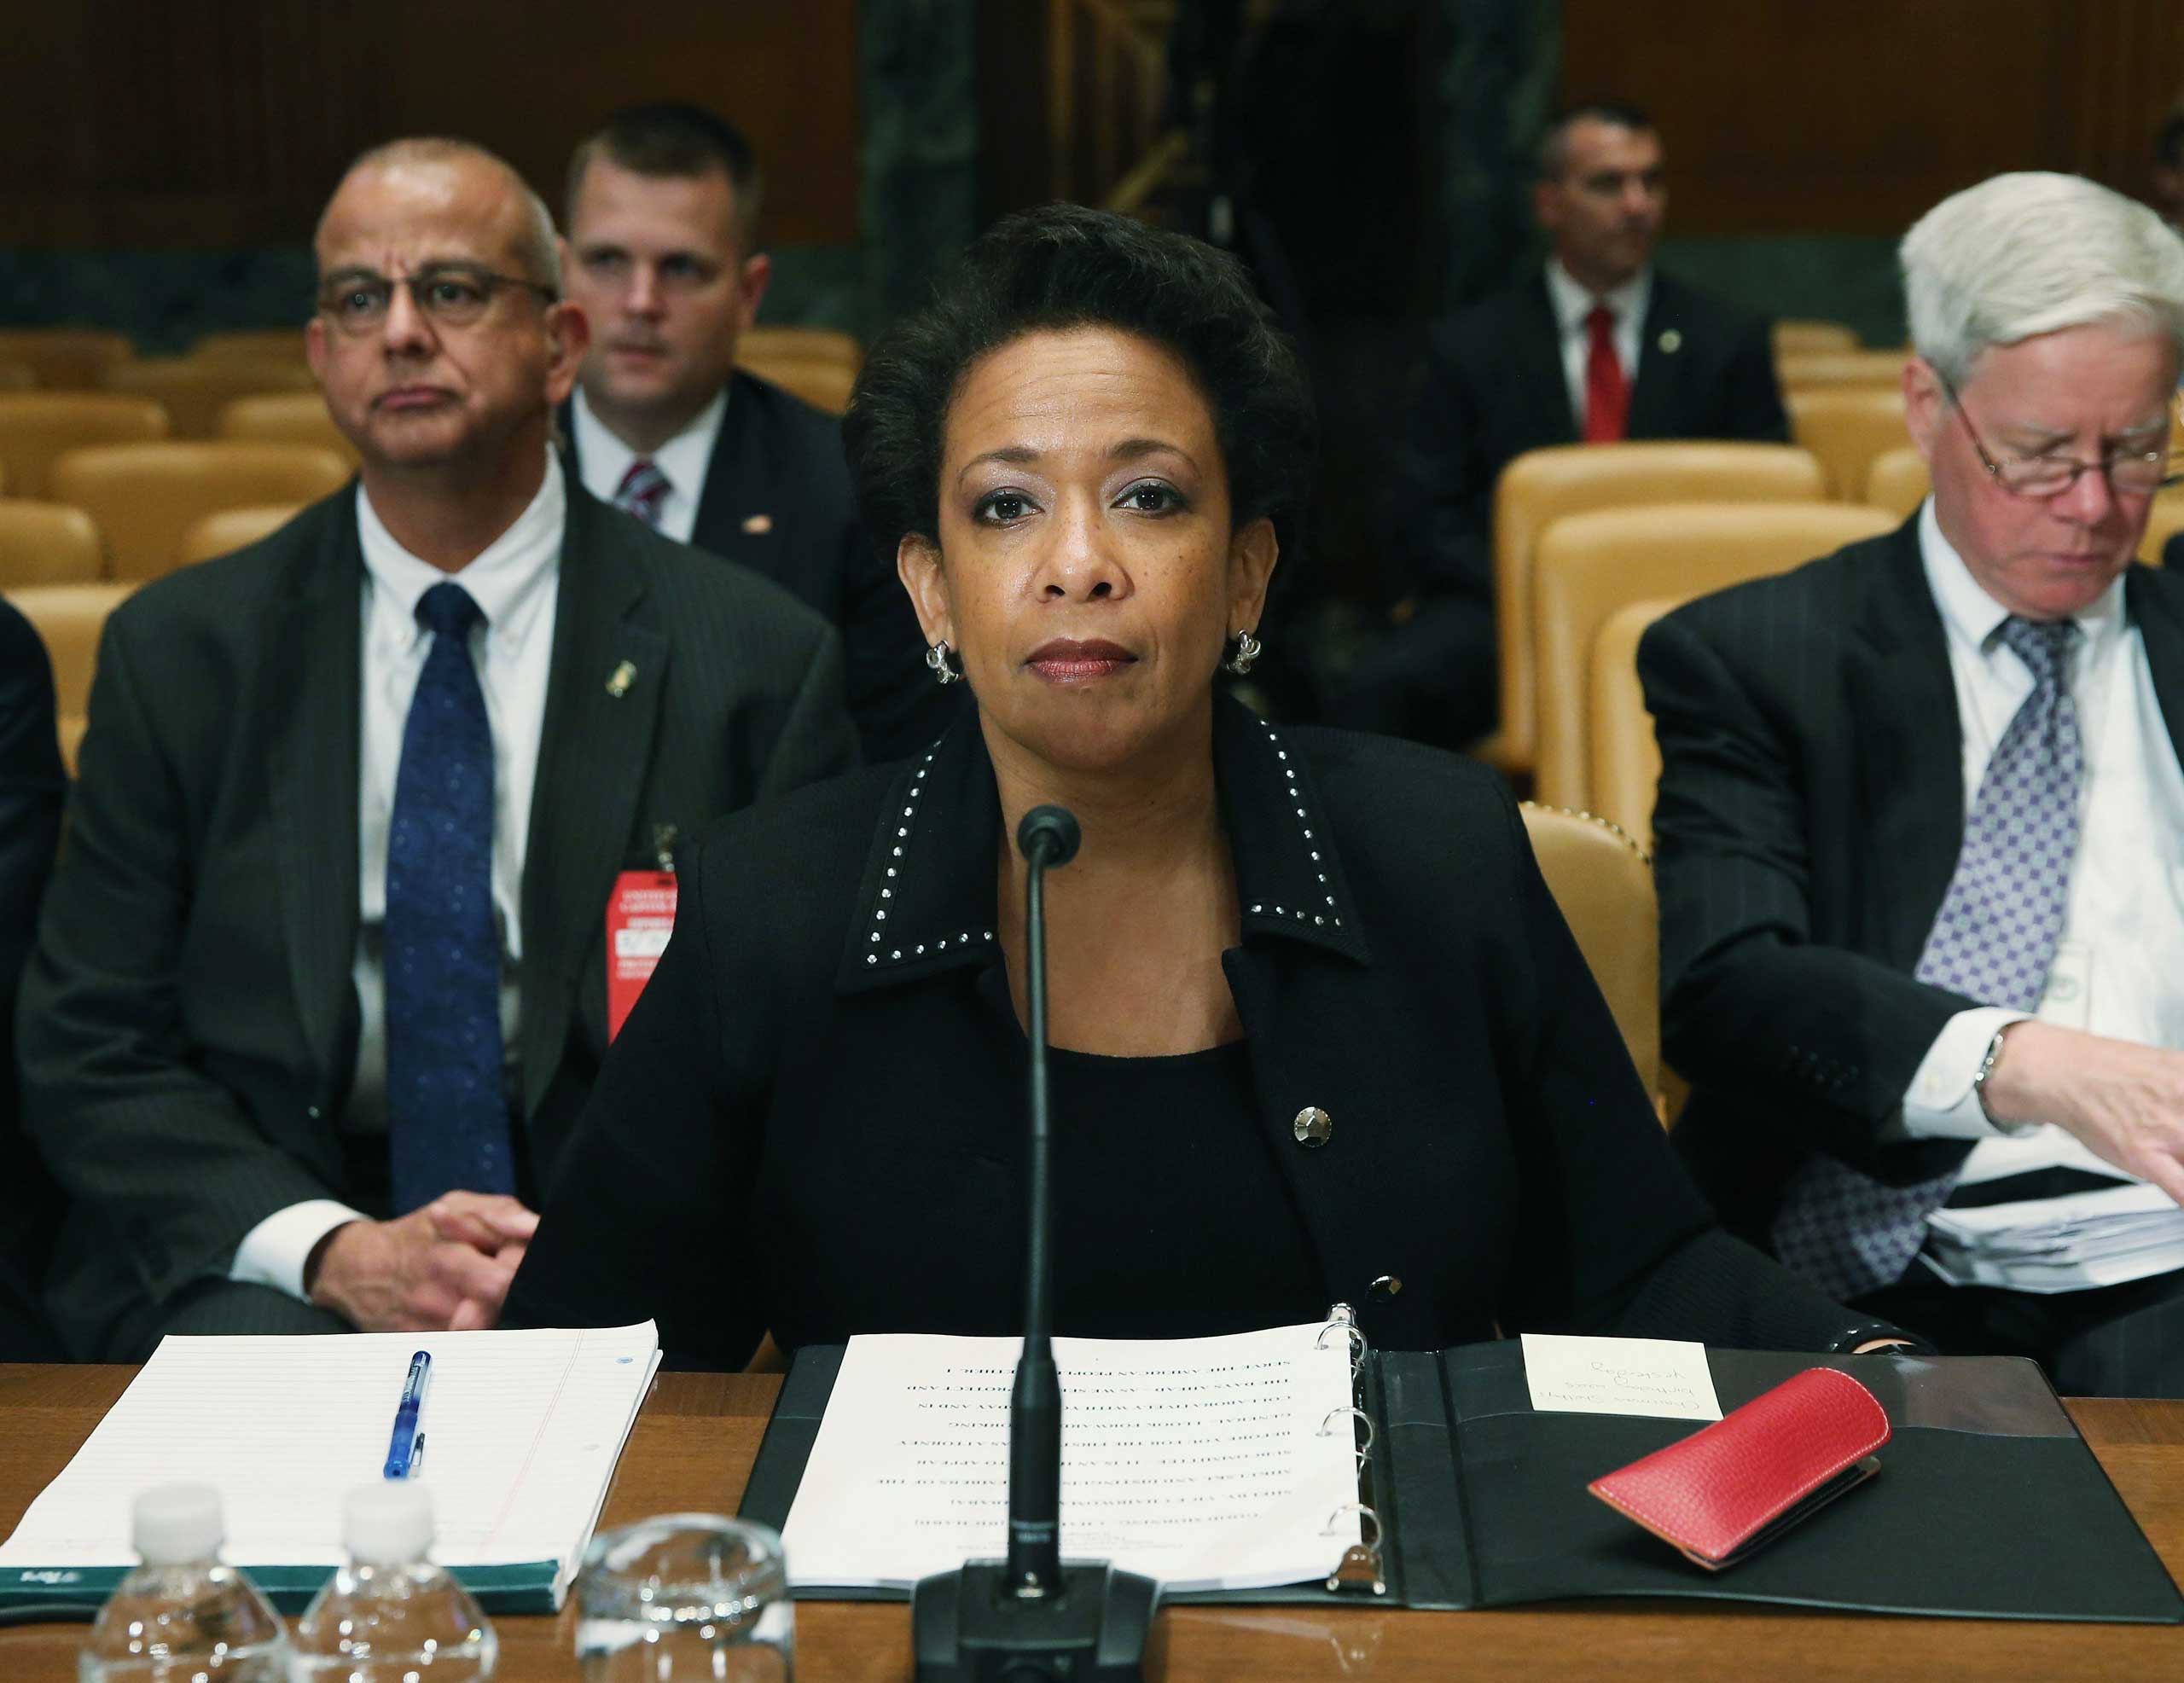 U.S. Attorney General Loretta Lynch appears before the Senate Appropriations Committee on Capitol Hill in Washington on May 7, 2015. (Mark Wilson—Getty Images)